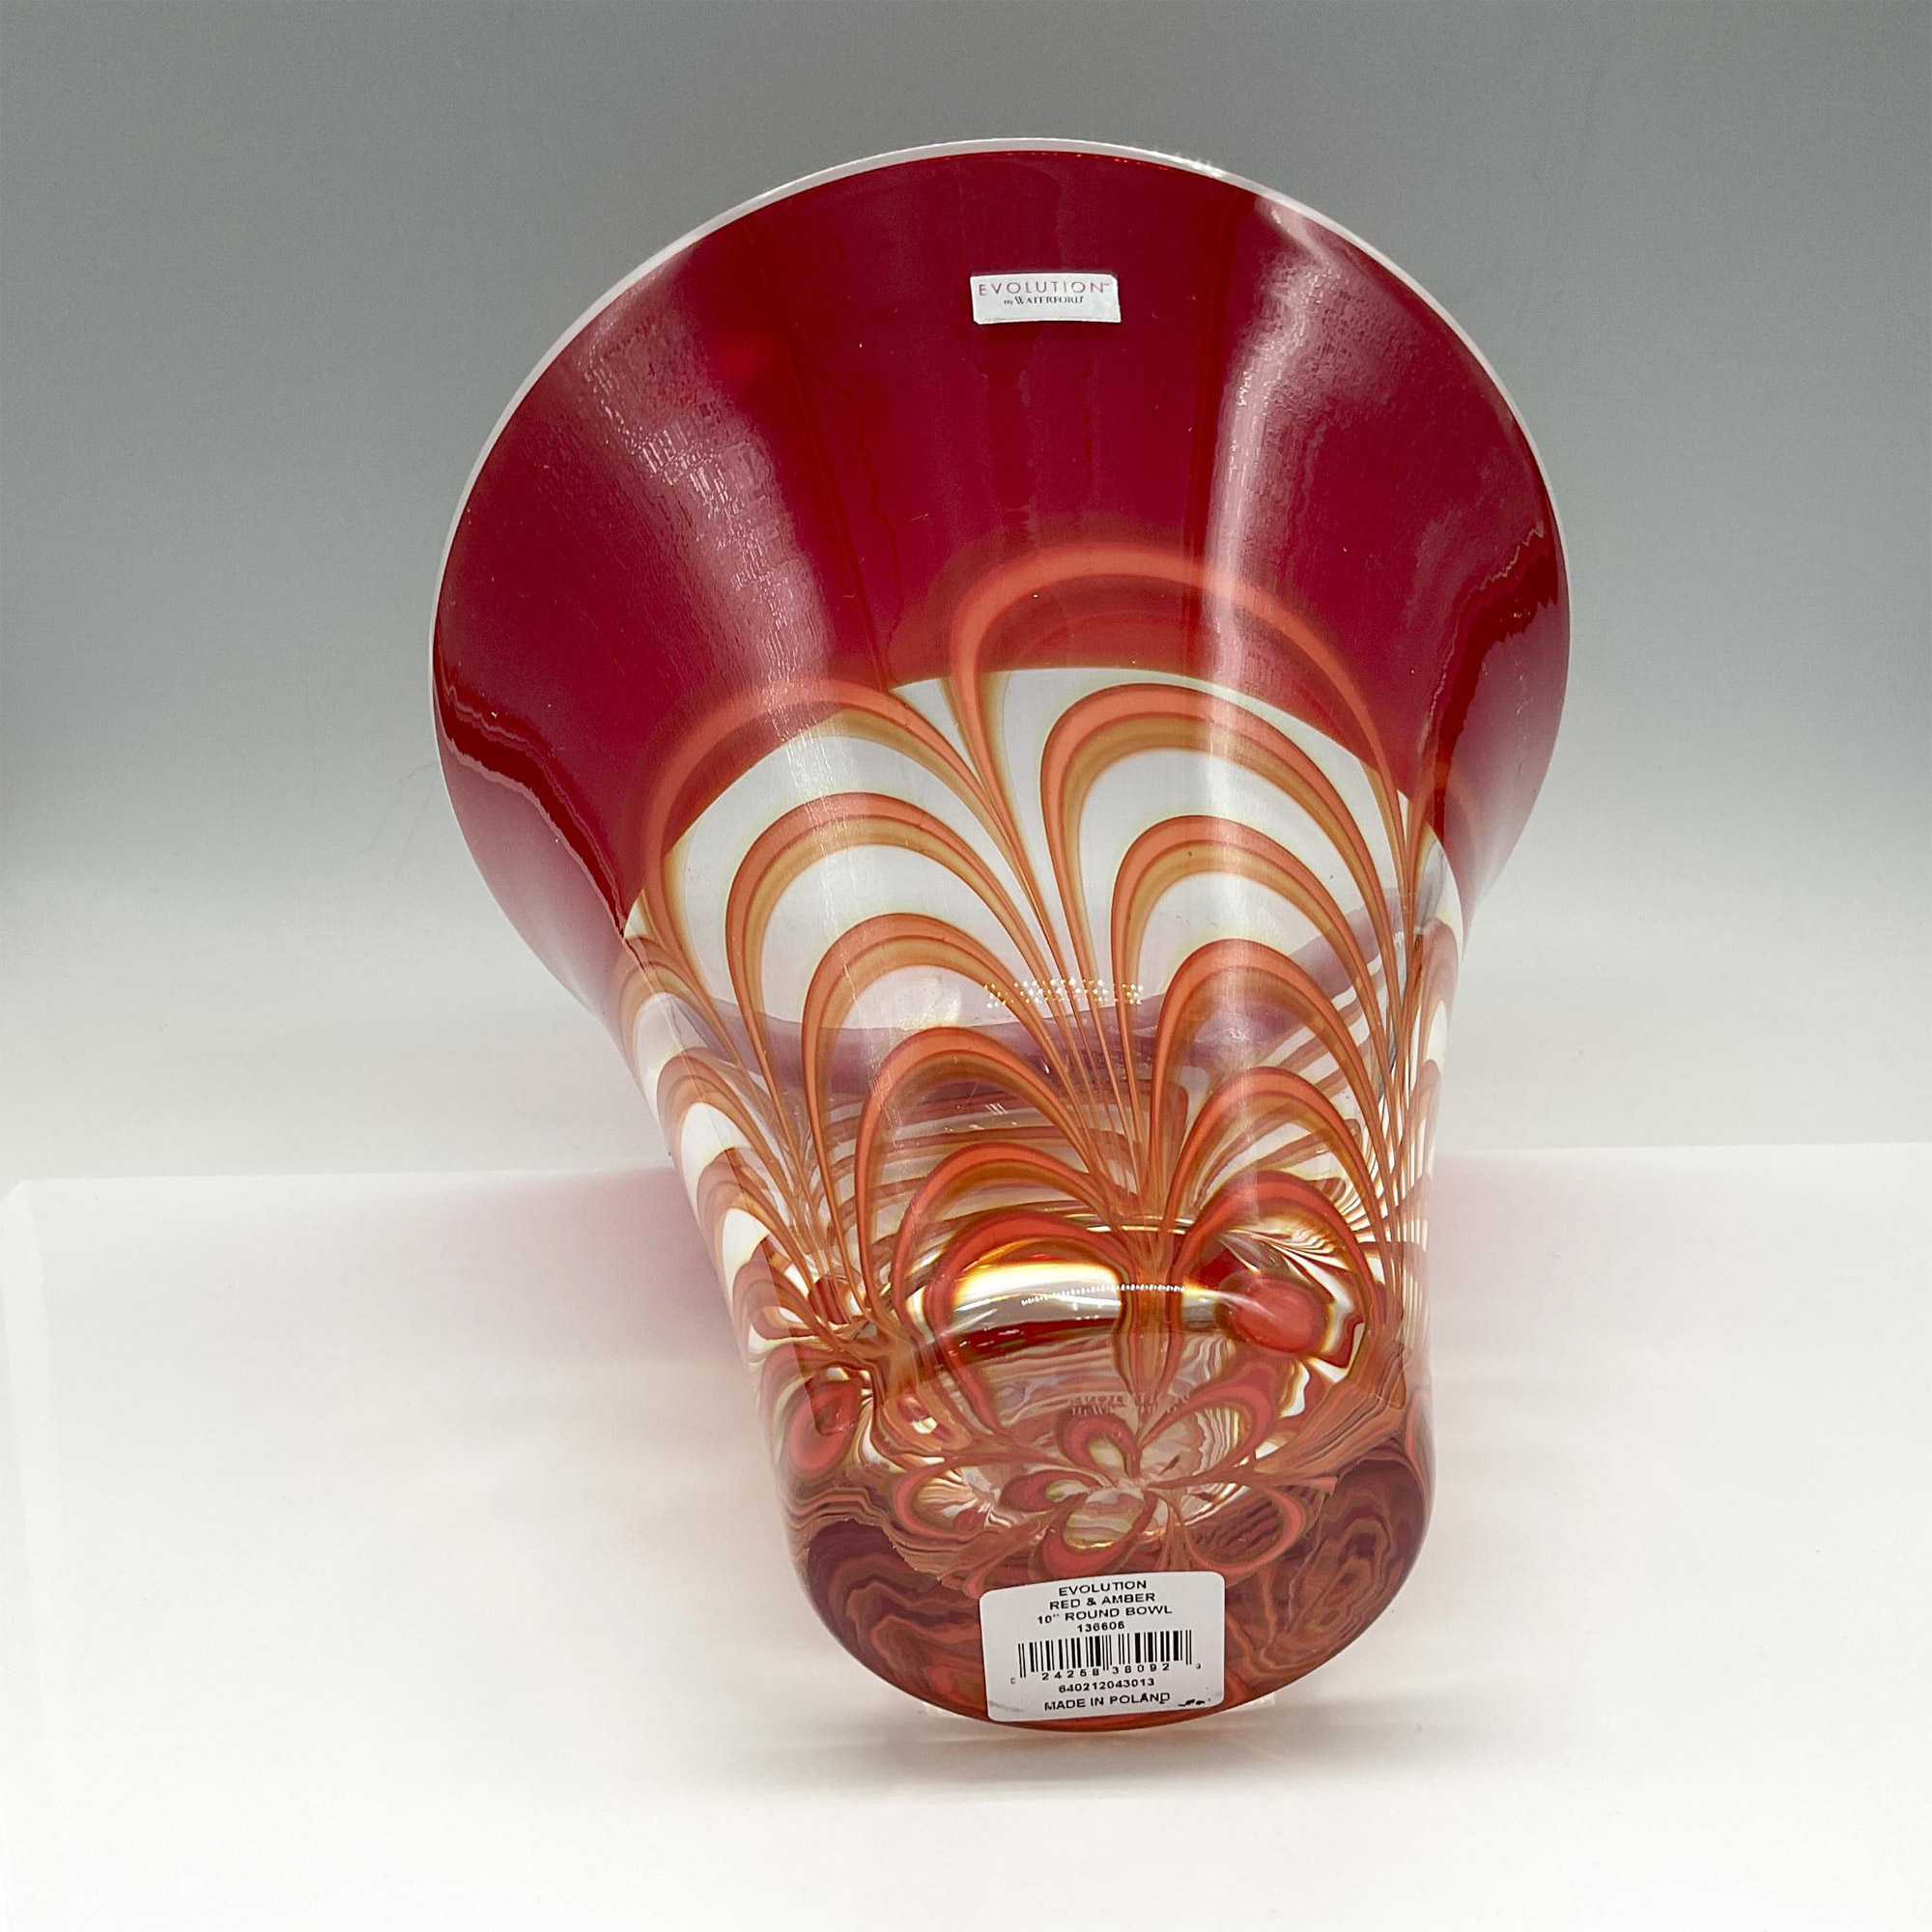 Waterford Crystal Bowl, Evolution Red and Amber - Image 3 of 3